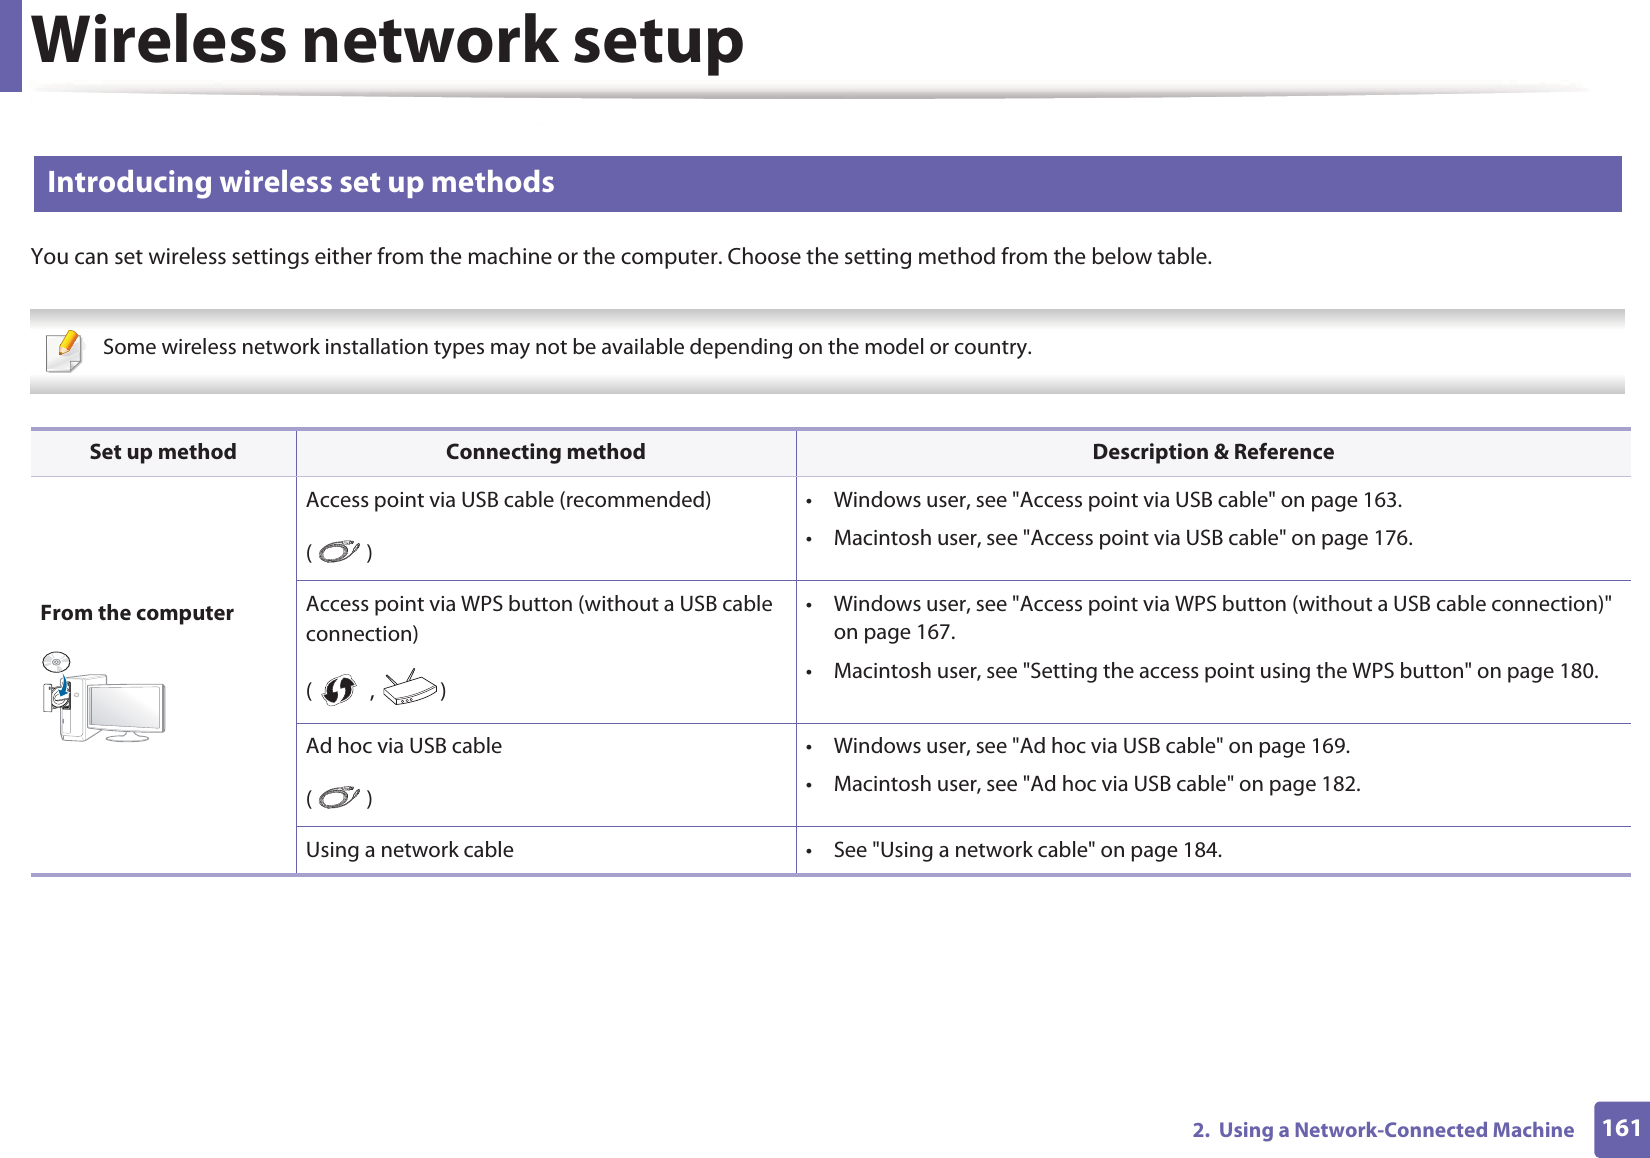 Wireless network setup1612.  Using a Network-Connected Machine12 Introducing wireless set up methodsYou can set wireless settings either from the machine or the computer. Choose the setting method from the below table. Some wireless network installation types may not be available depending on the model or country.  Set up method Connecting method Description &amp; ReferenceFrom the computerAccess point via USB cable (recommended)()• Windows user, see &quot;Access point via USB cable&quot; on page 163.• Macintosh user, see &quot;Access point via USB cable&quot; on page 176.Access point via WPS button (without a USB cable connection)( ,  )• Windows user, see &quot;Access point via WPS button (without a USB cable connection)&quot; on page 167.• Macintosh user, see &quot;Setting the access point using the WPS button&quot; on page 180.Ad hoc via USB cable()• Windows user, see &quot;Ad hoc via USB cable&quot; on page 169.• Macintosh user, see &quot;Ad hoc via USB cable&quot; on page 182.Using a network cable • See &quot;Using a network cable&quot; on page 184.